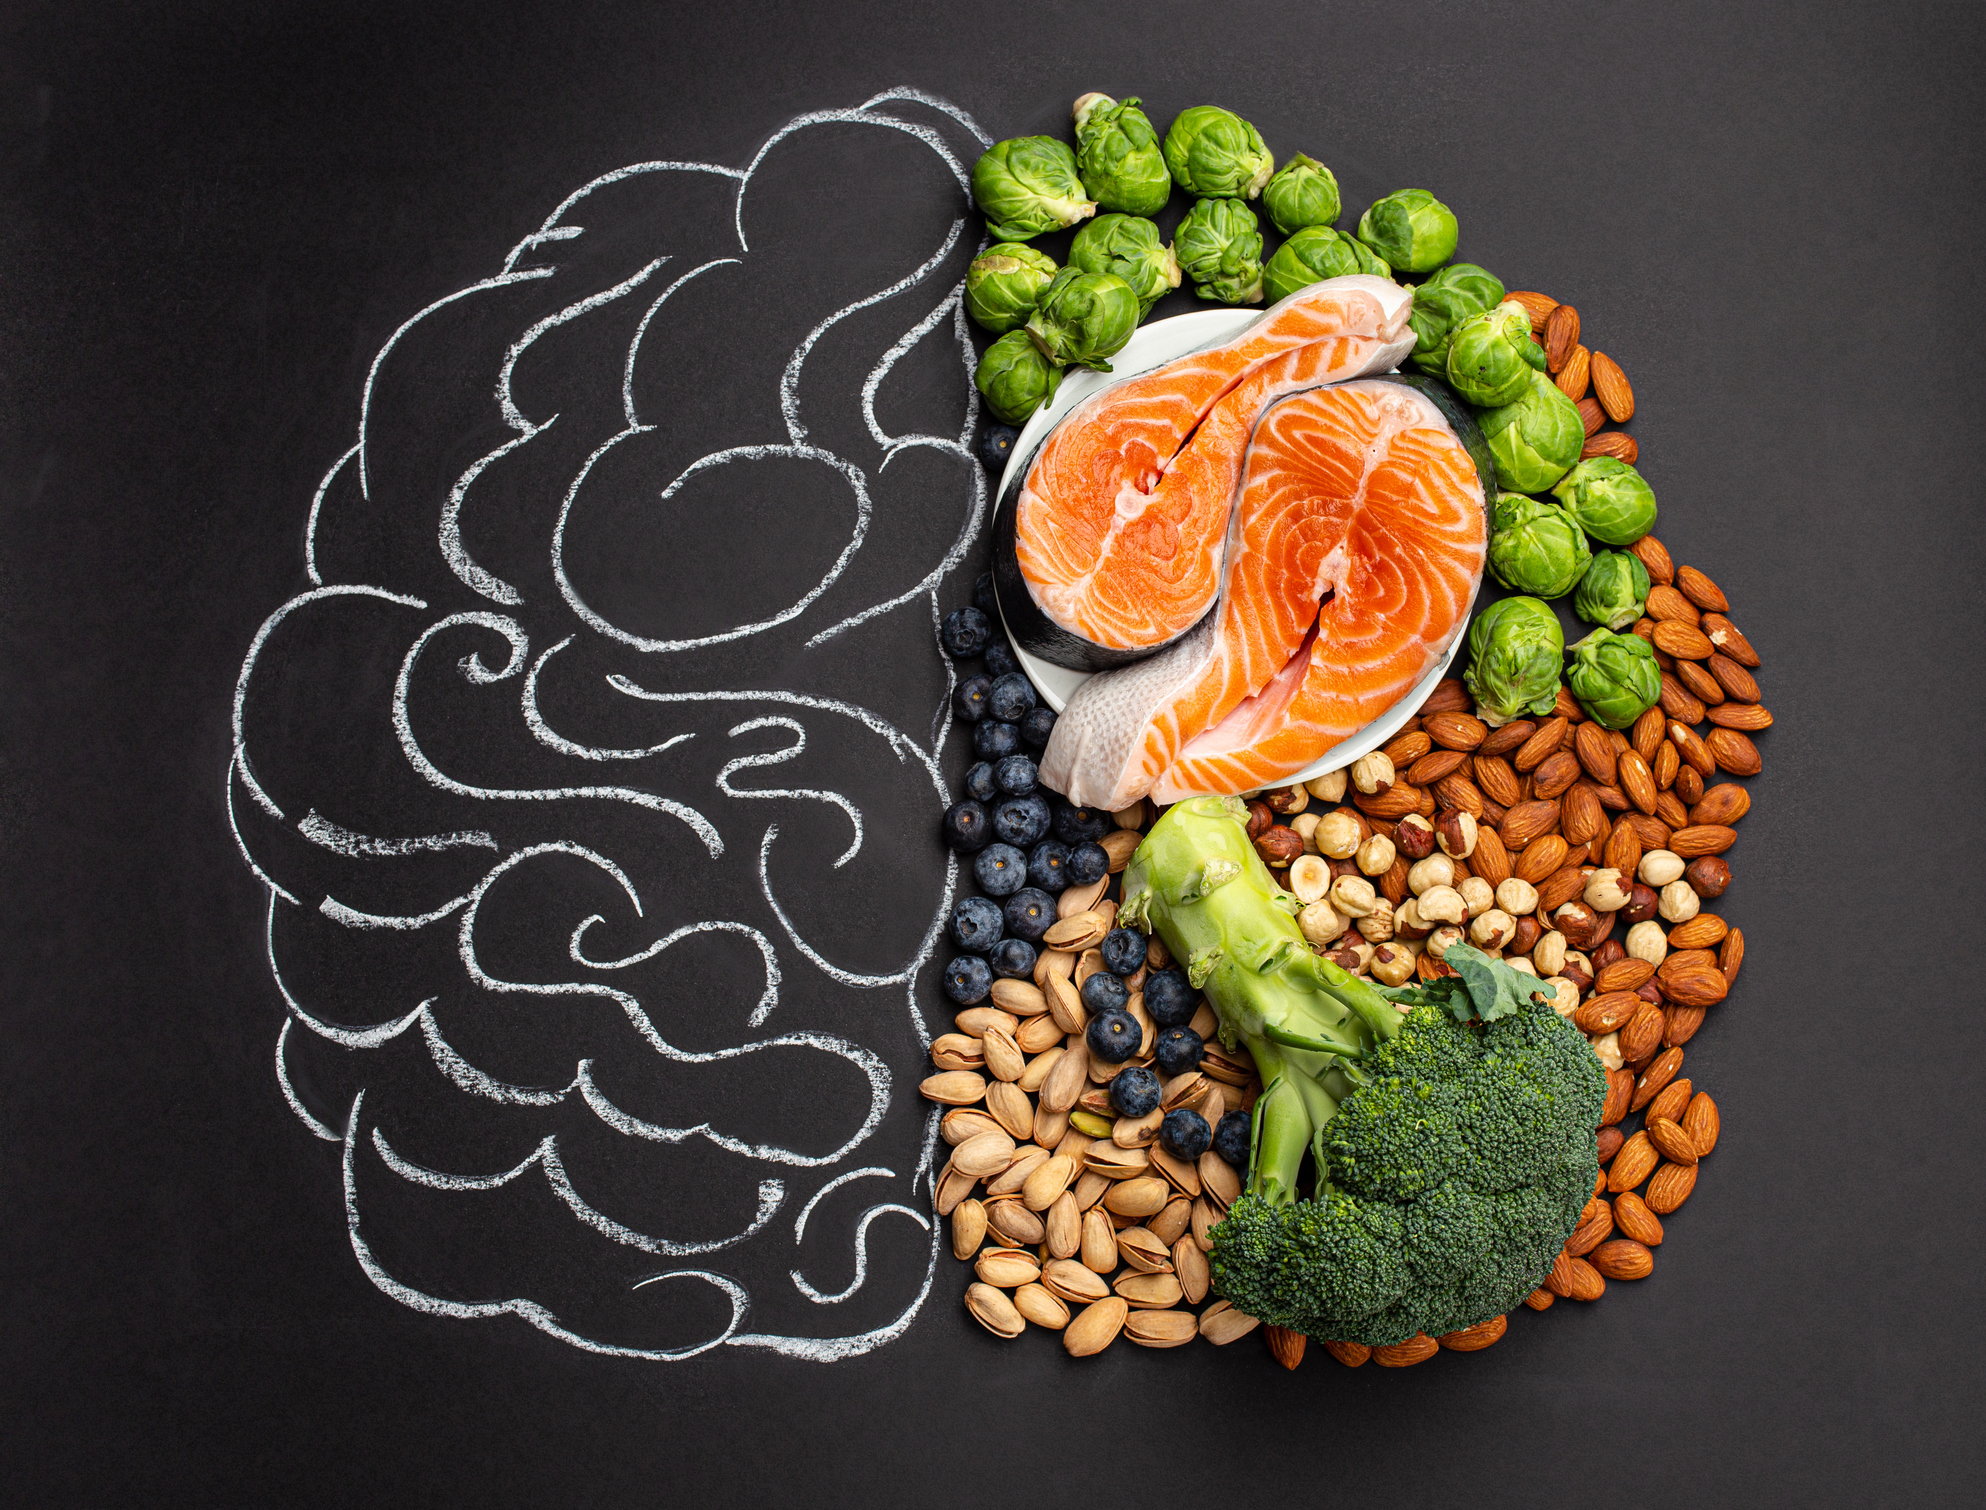 Chalk hand drawn brain with assorted food that is good for brain health and memory: fresh salmon fish, green vegetables, nuts, and berries